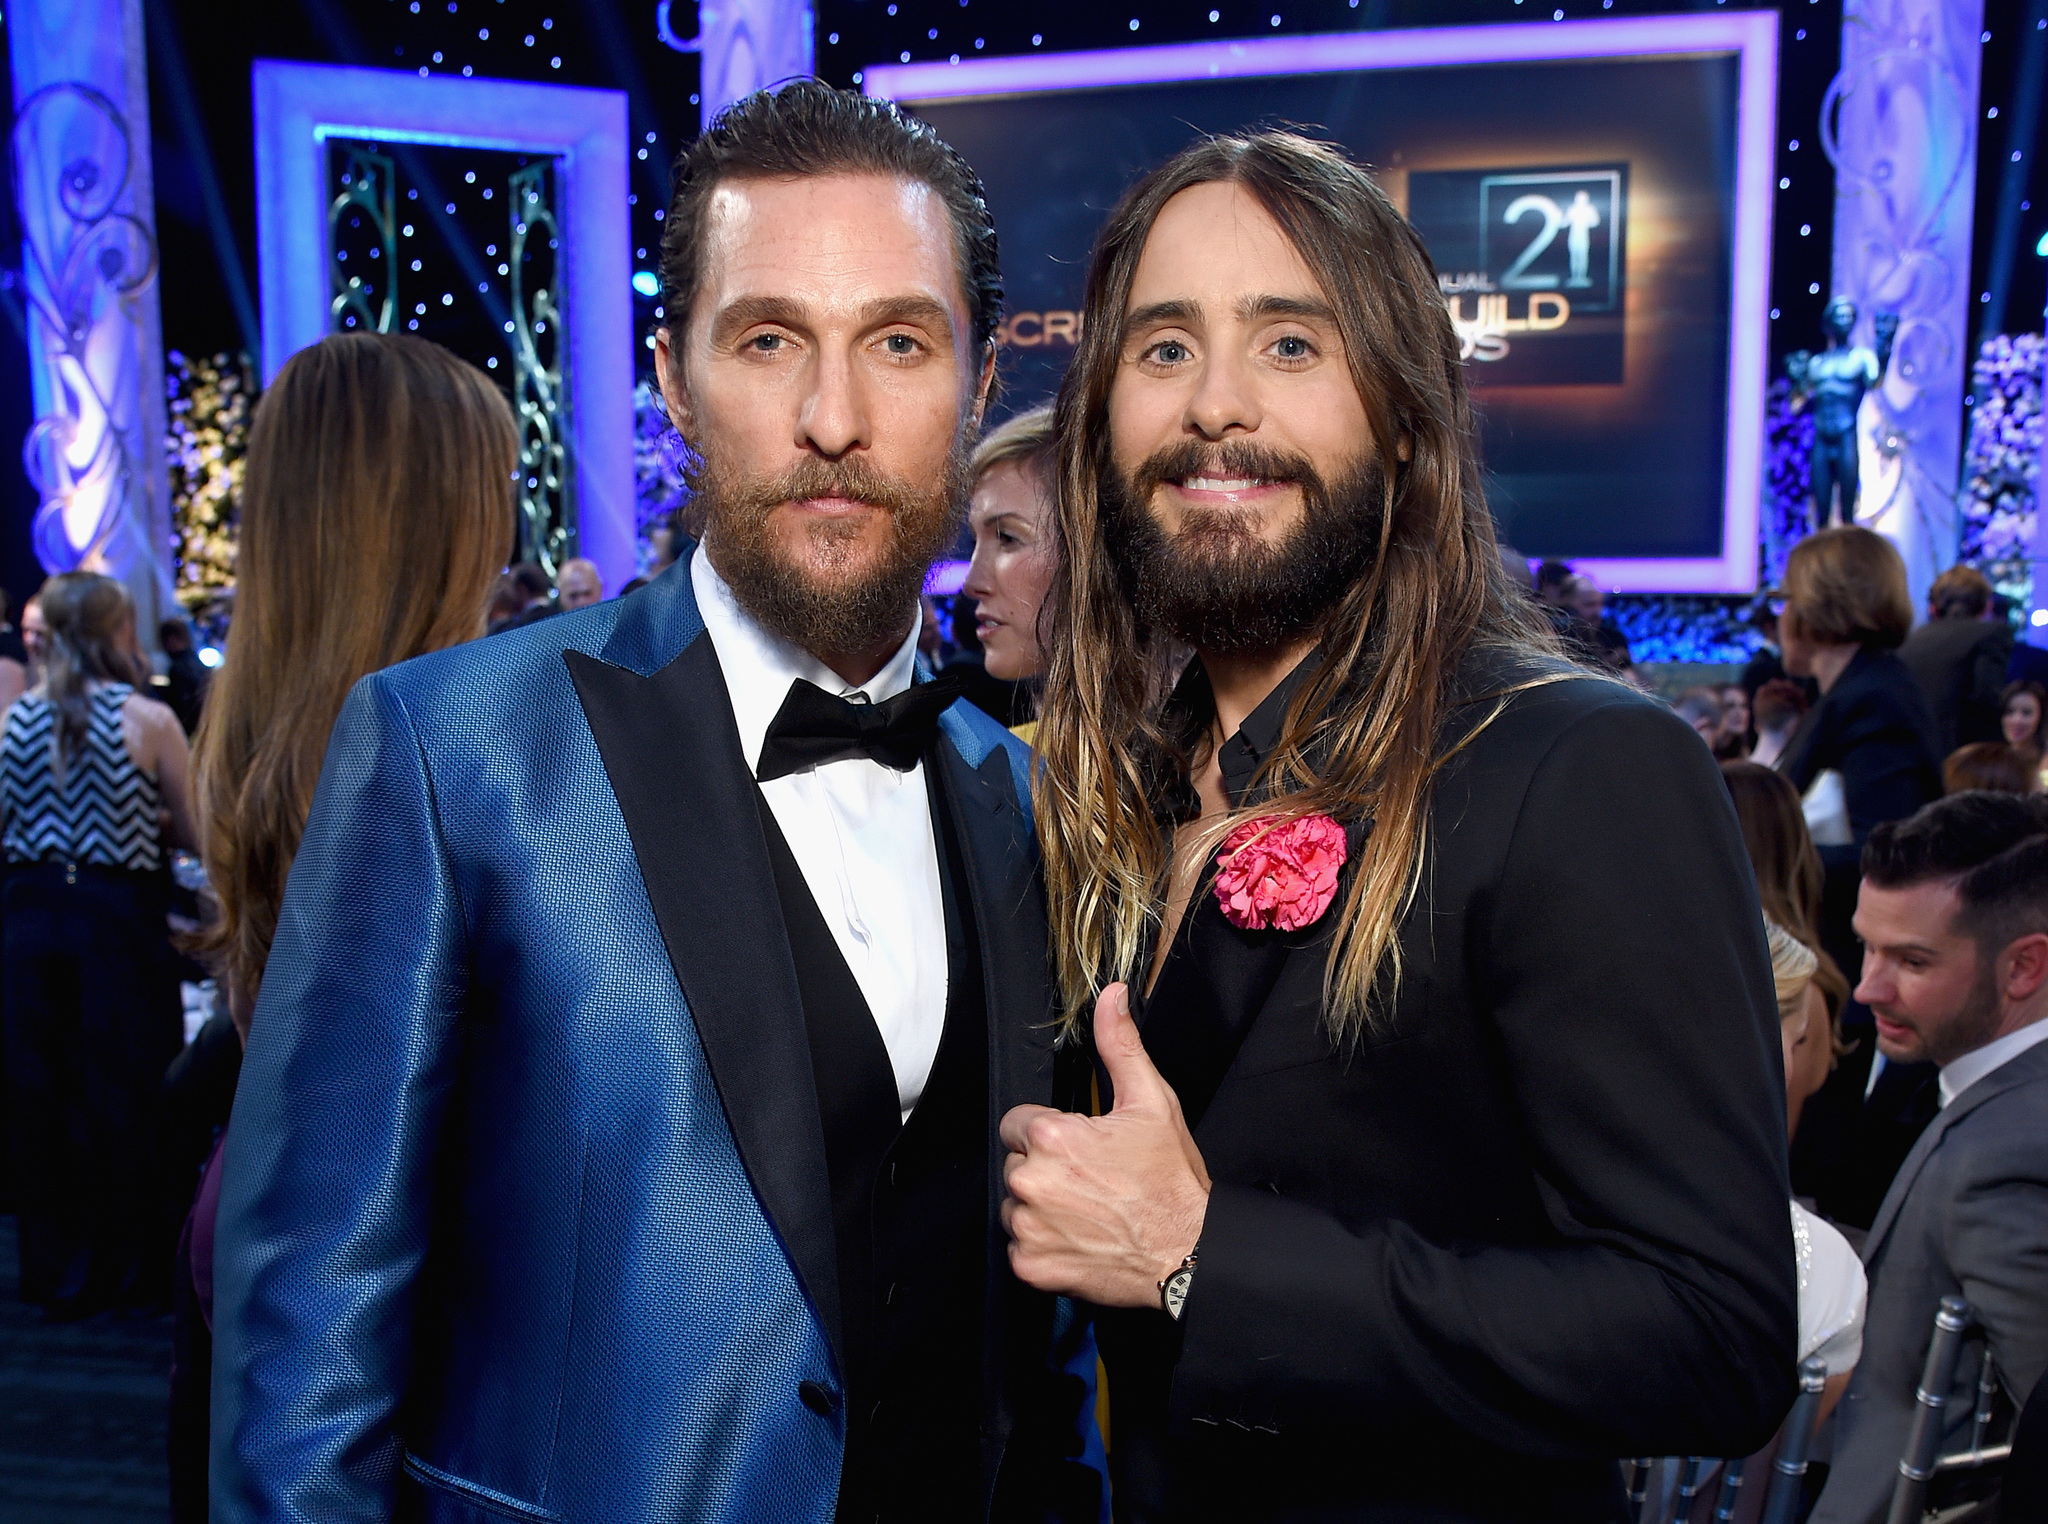 Matthew McConaughey and Jared Leto at event of The 21st Annual Screen Actors Guild Awards (2015)